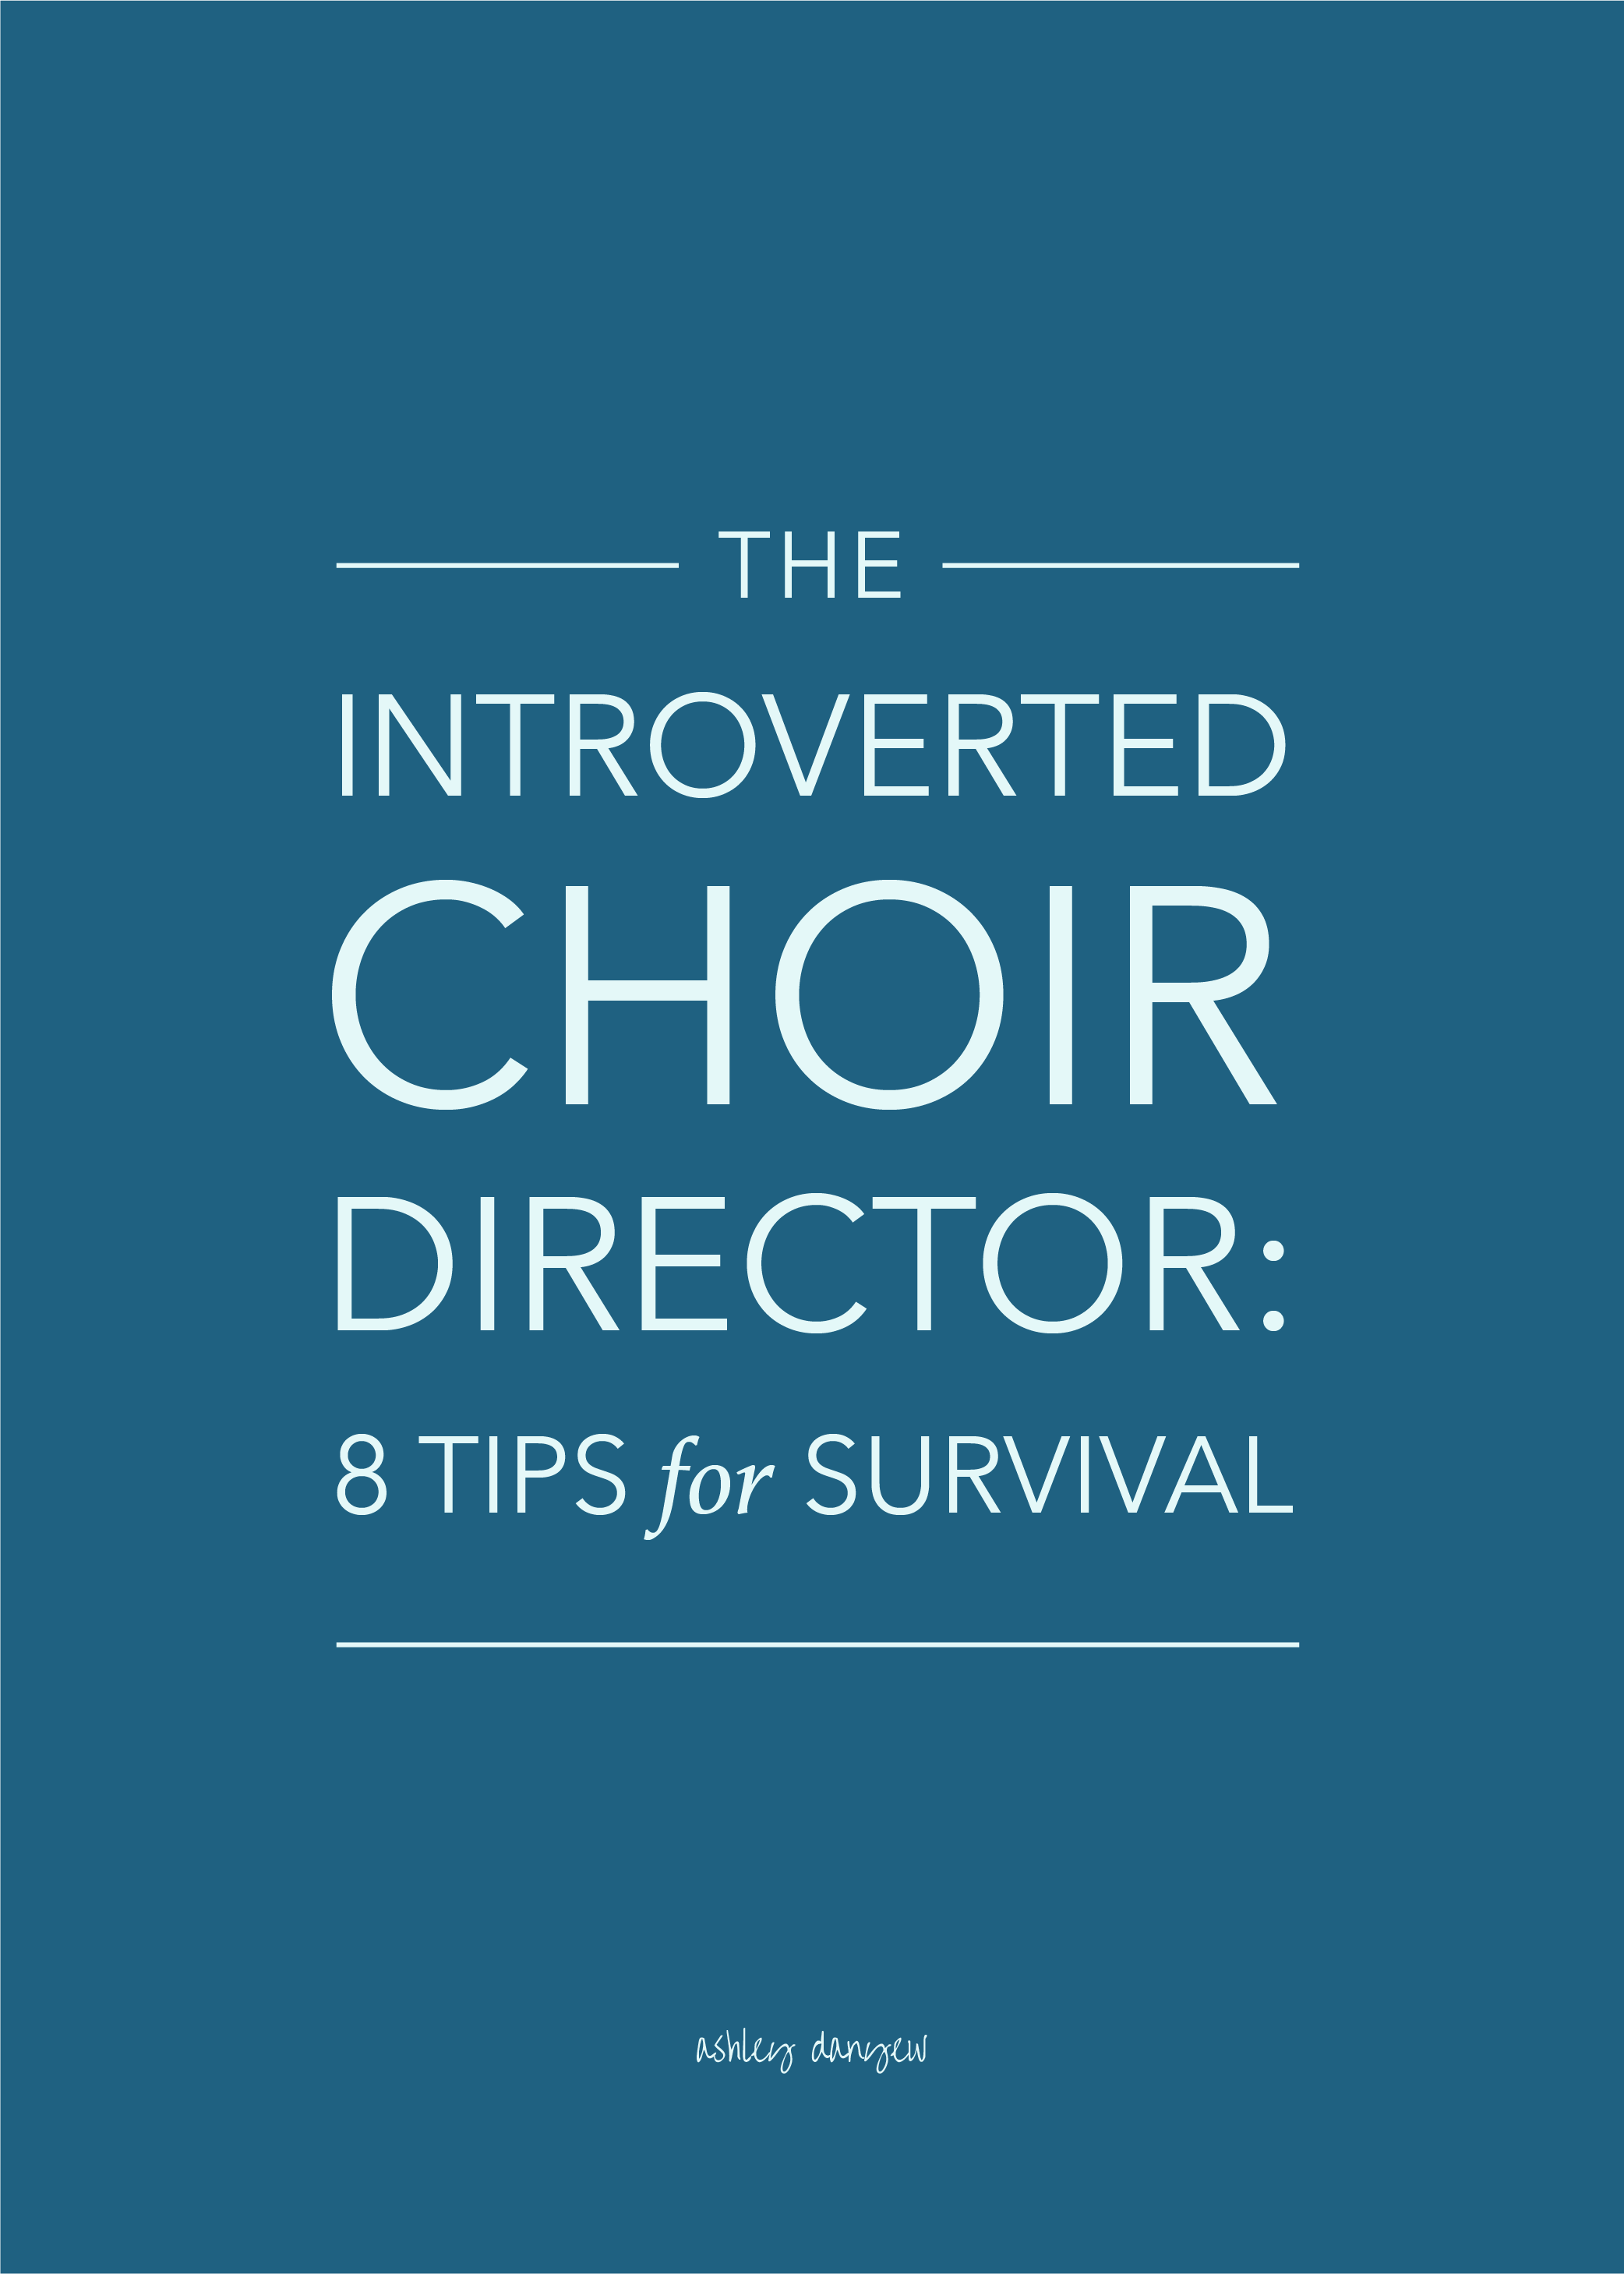 The Introverted Choir Director: 8 Tips for Survival